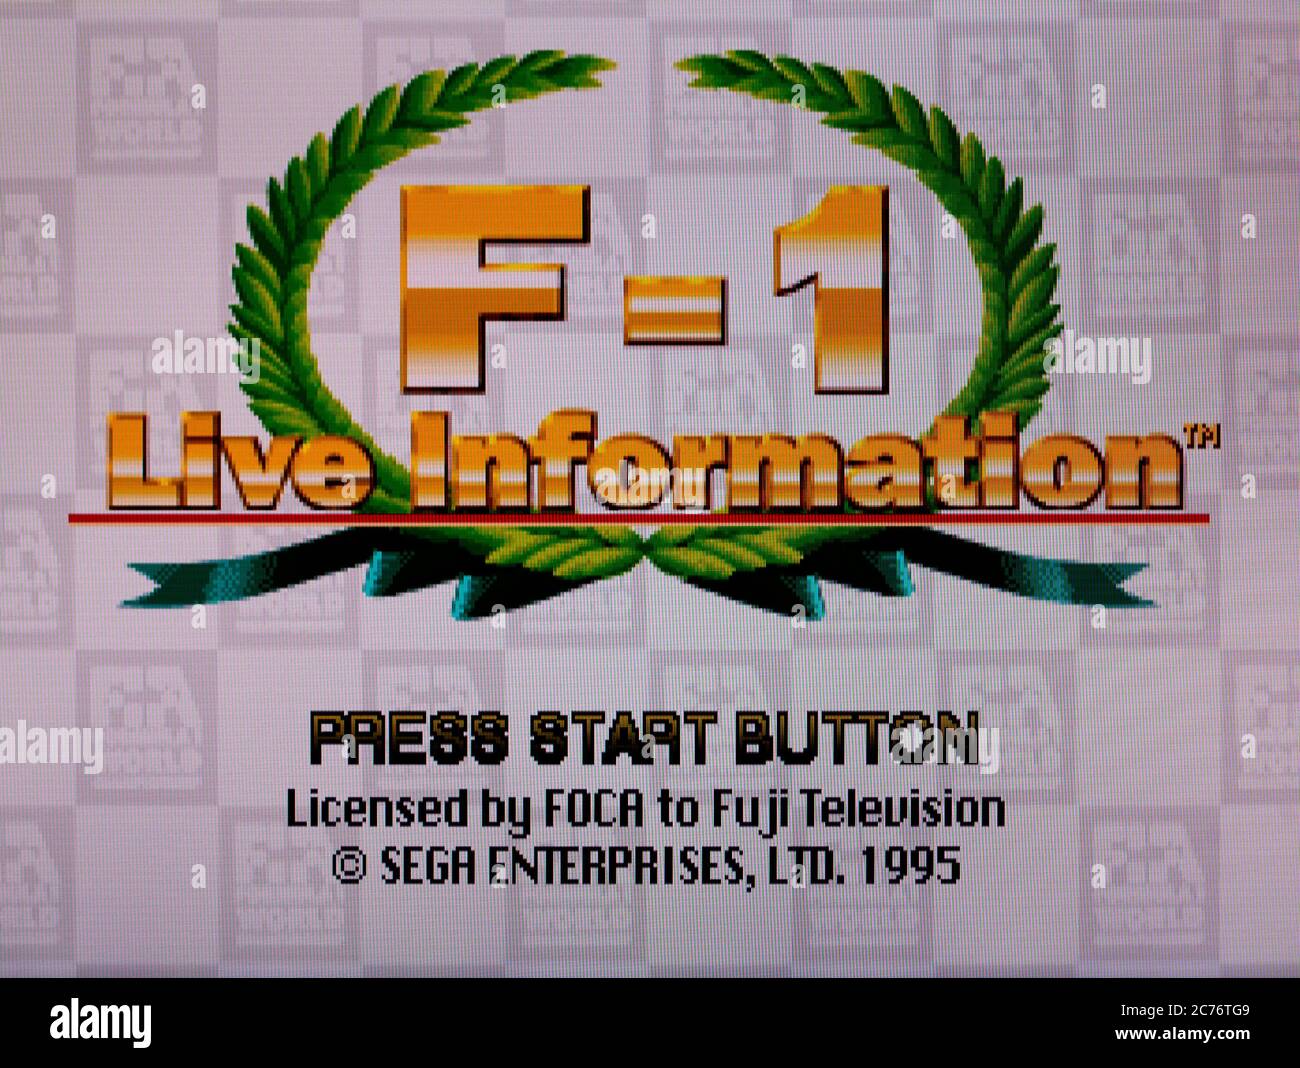 F-1 Live Information - Sega Saturn Videogame - Editorial use only Stock Photo